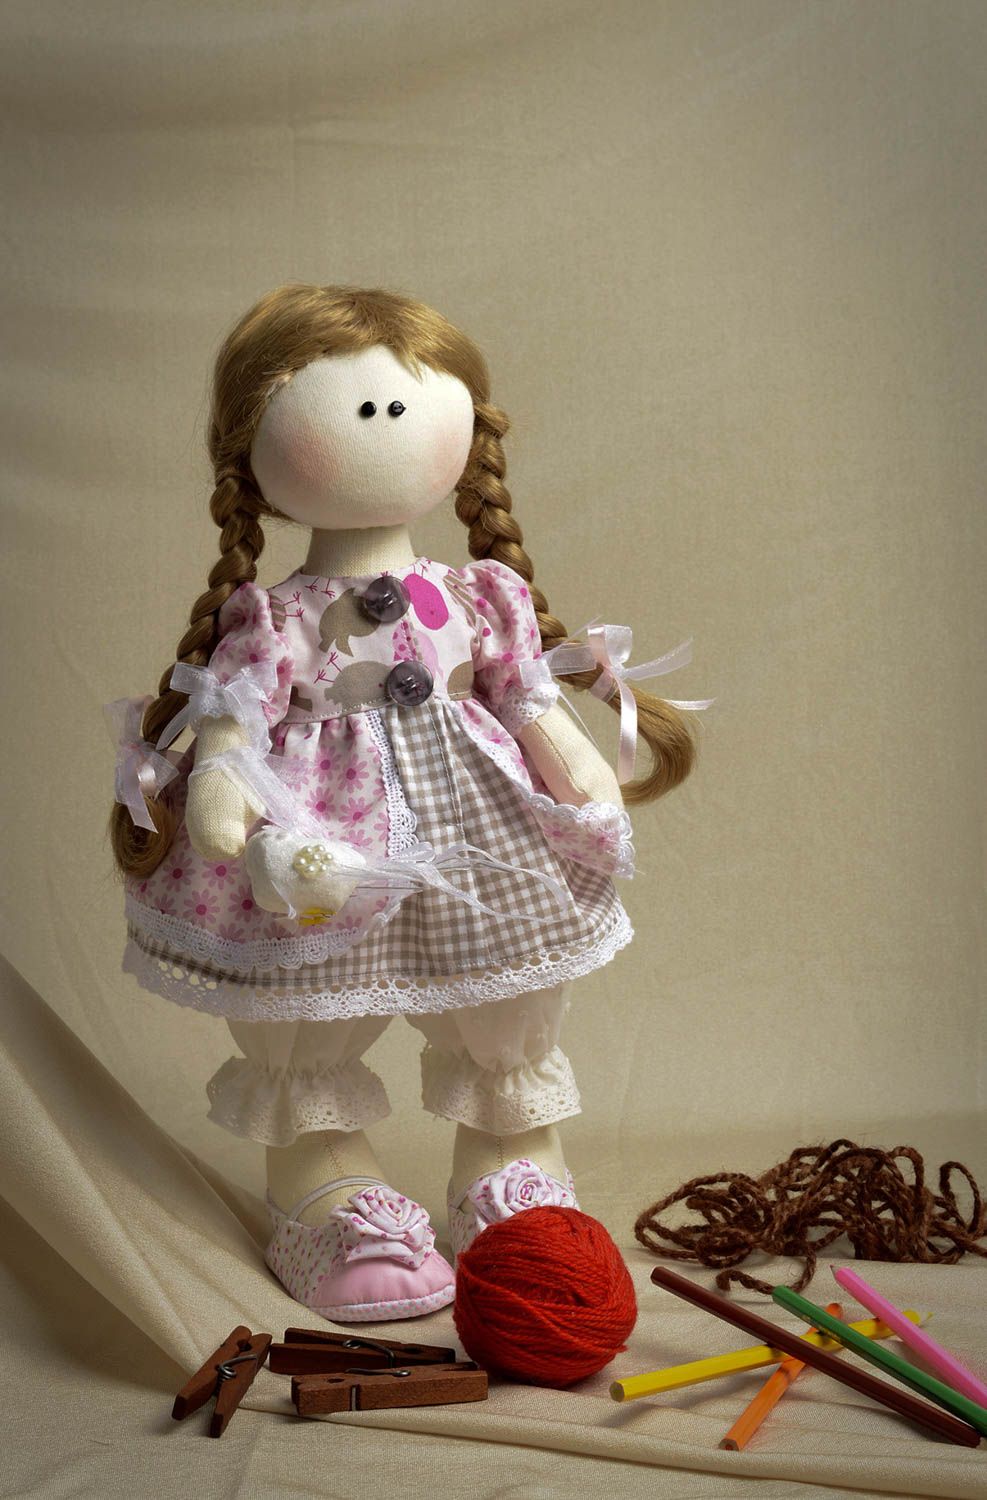 Beautiful handmade rag doll best toys for kids stuffed fabric toy gift ideas photo 5